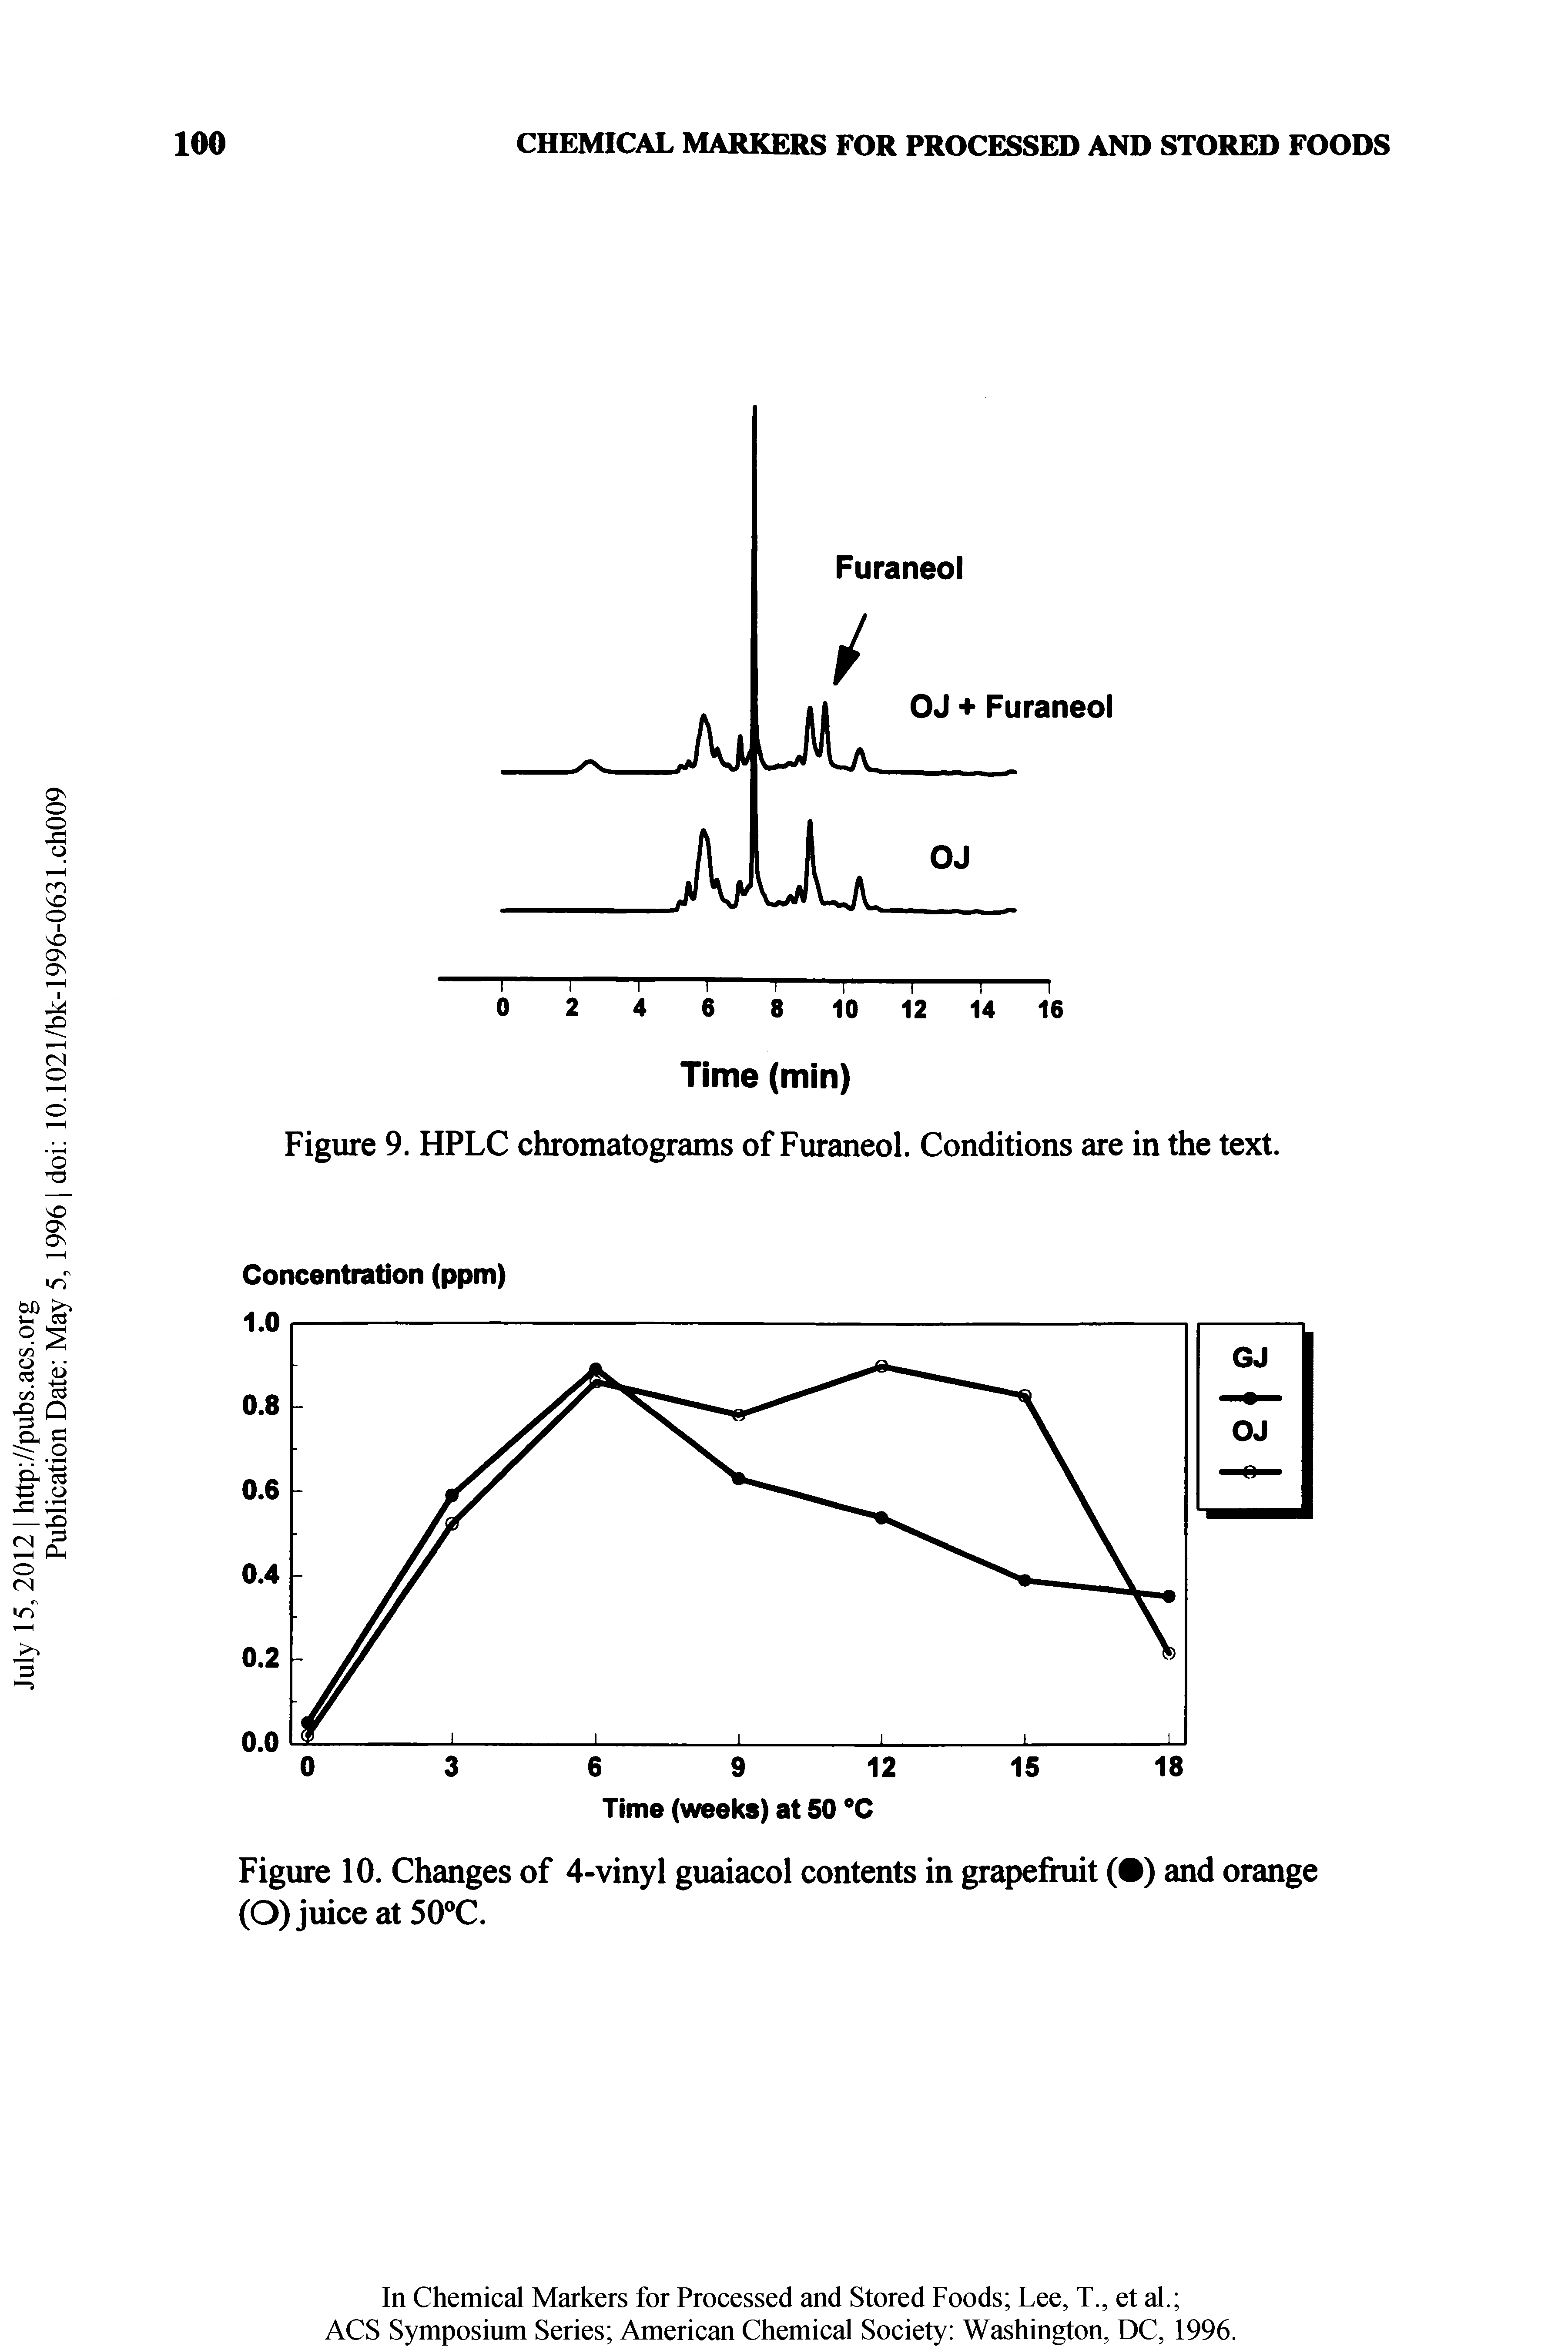 Figure 10. Changes of 4-vinyl guaiacol contents in grapefhiit ( ) and orange (O) juice at 50 C.